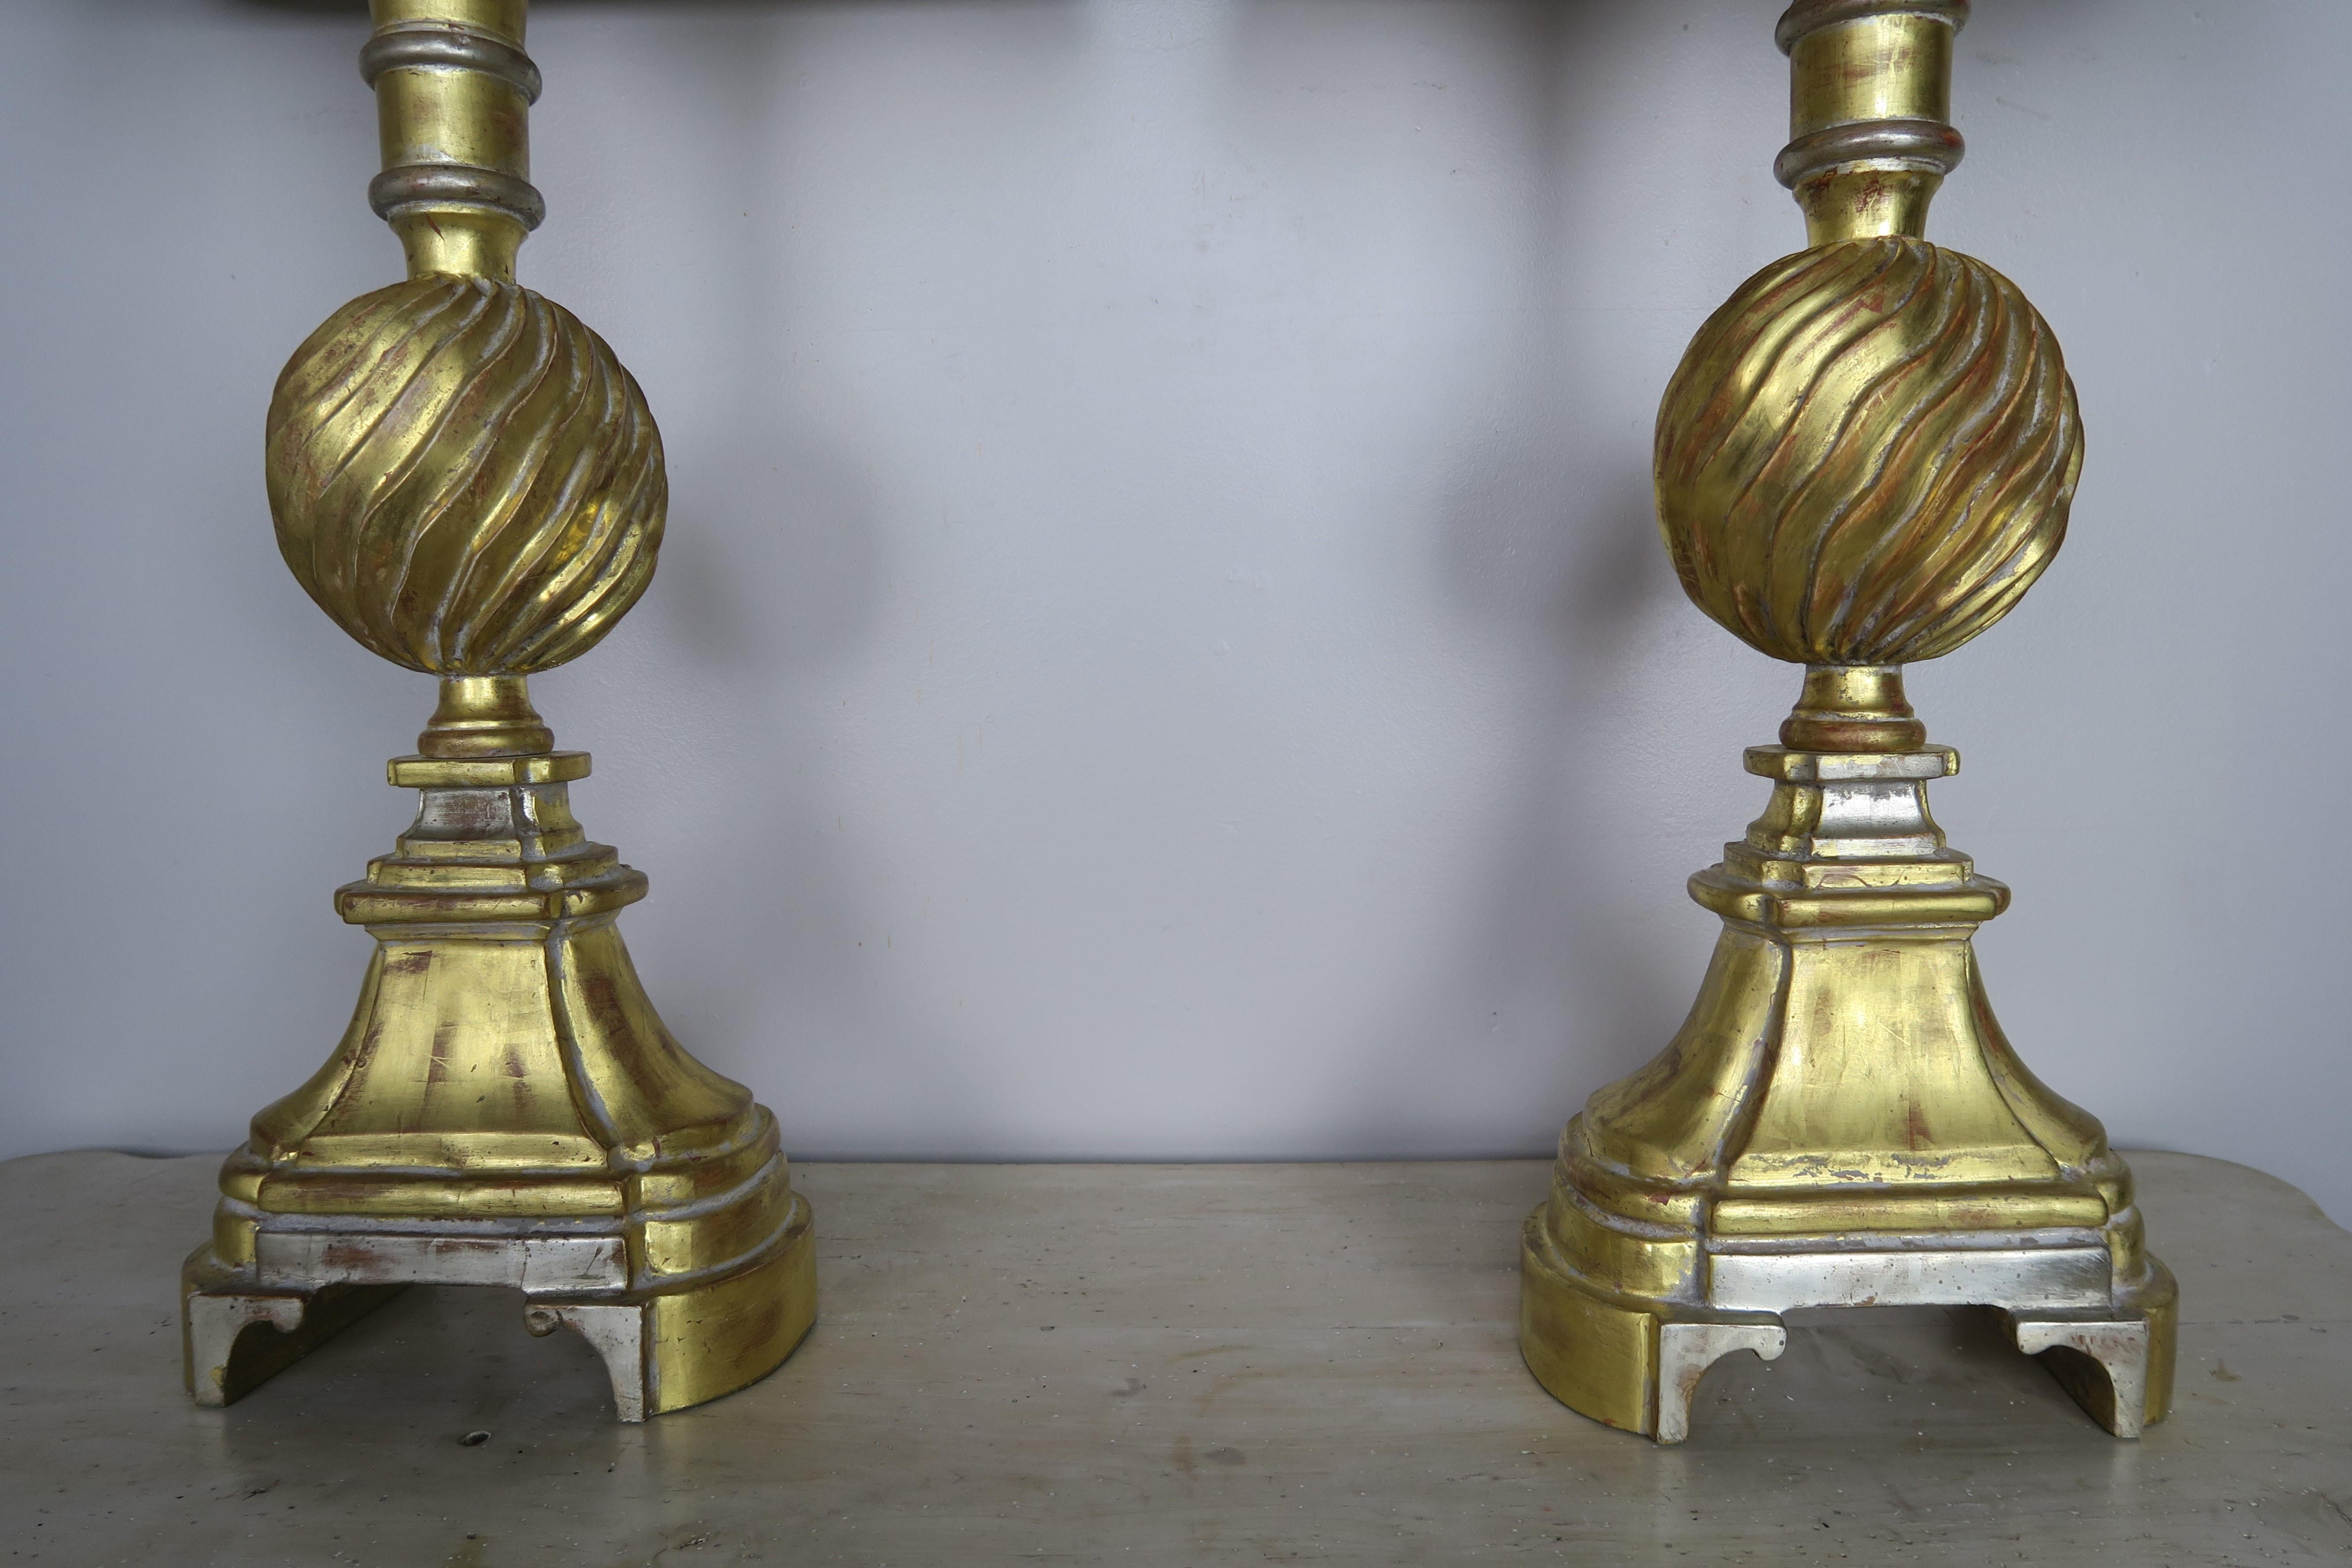 Modern Pair of 22-Karat Gold and Silver Leaf Lamps with Parchment Shades